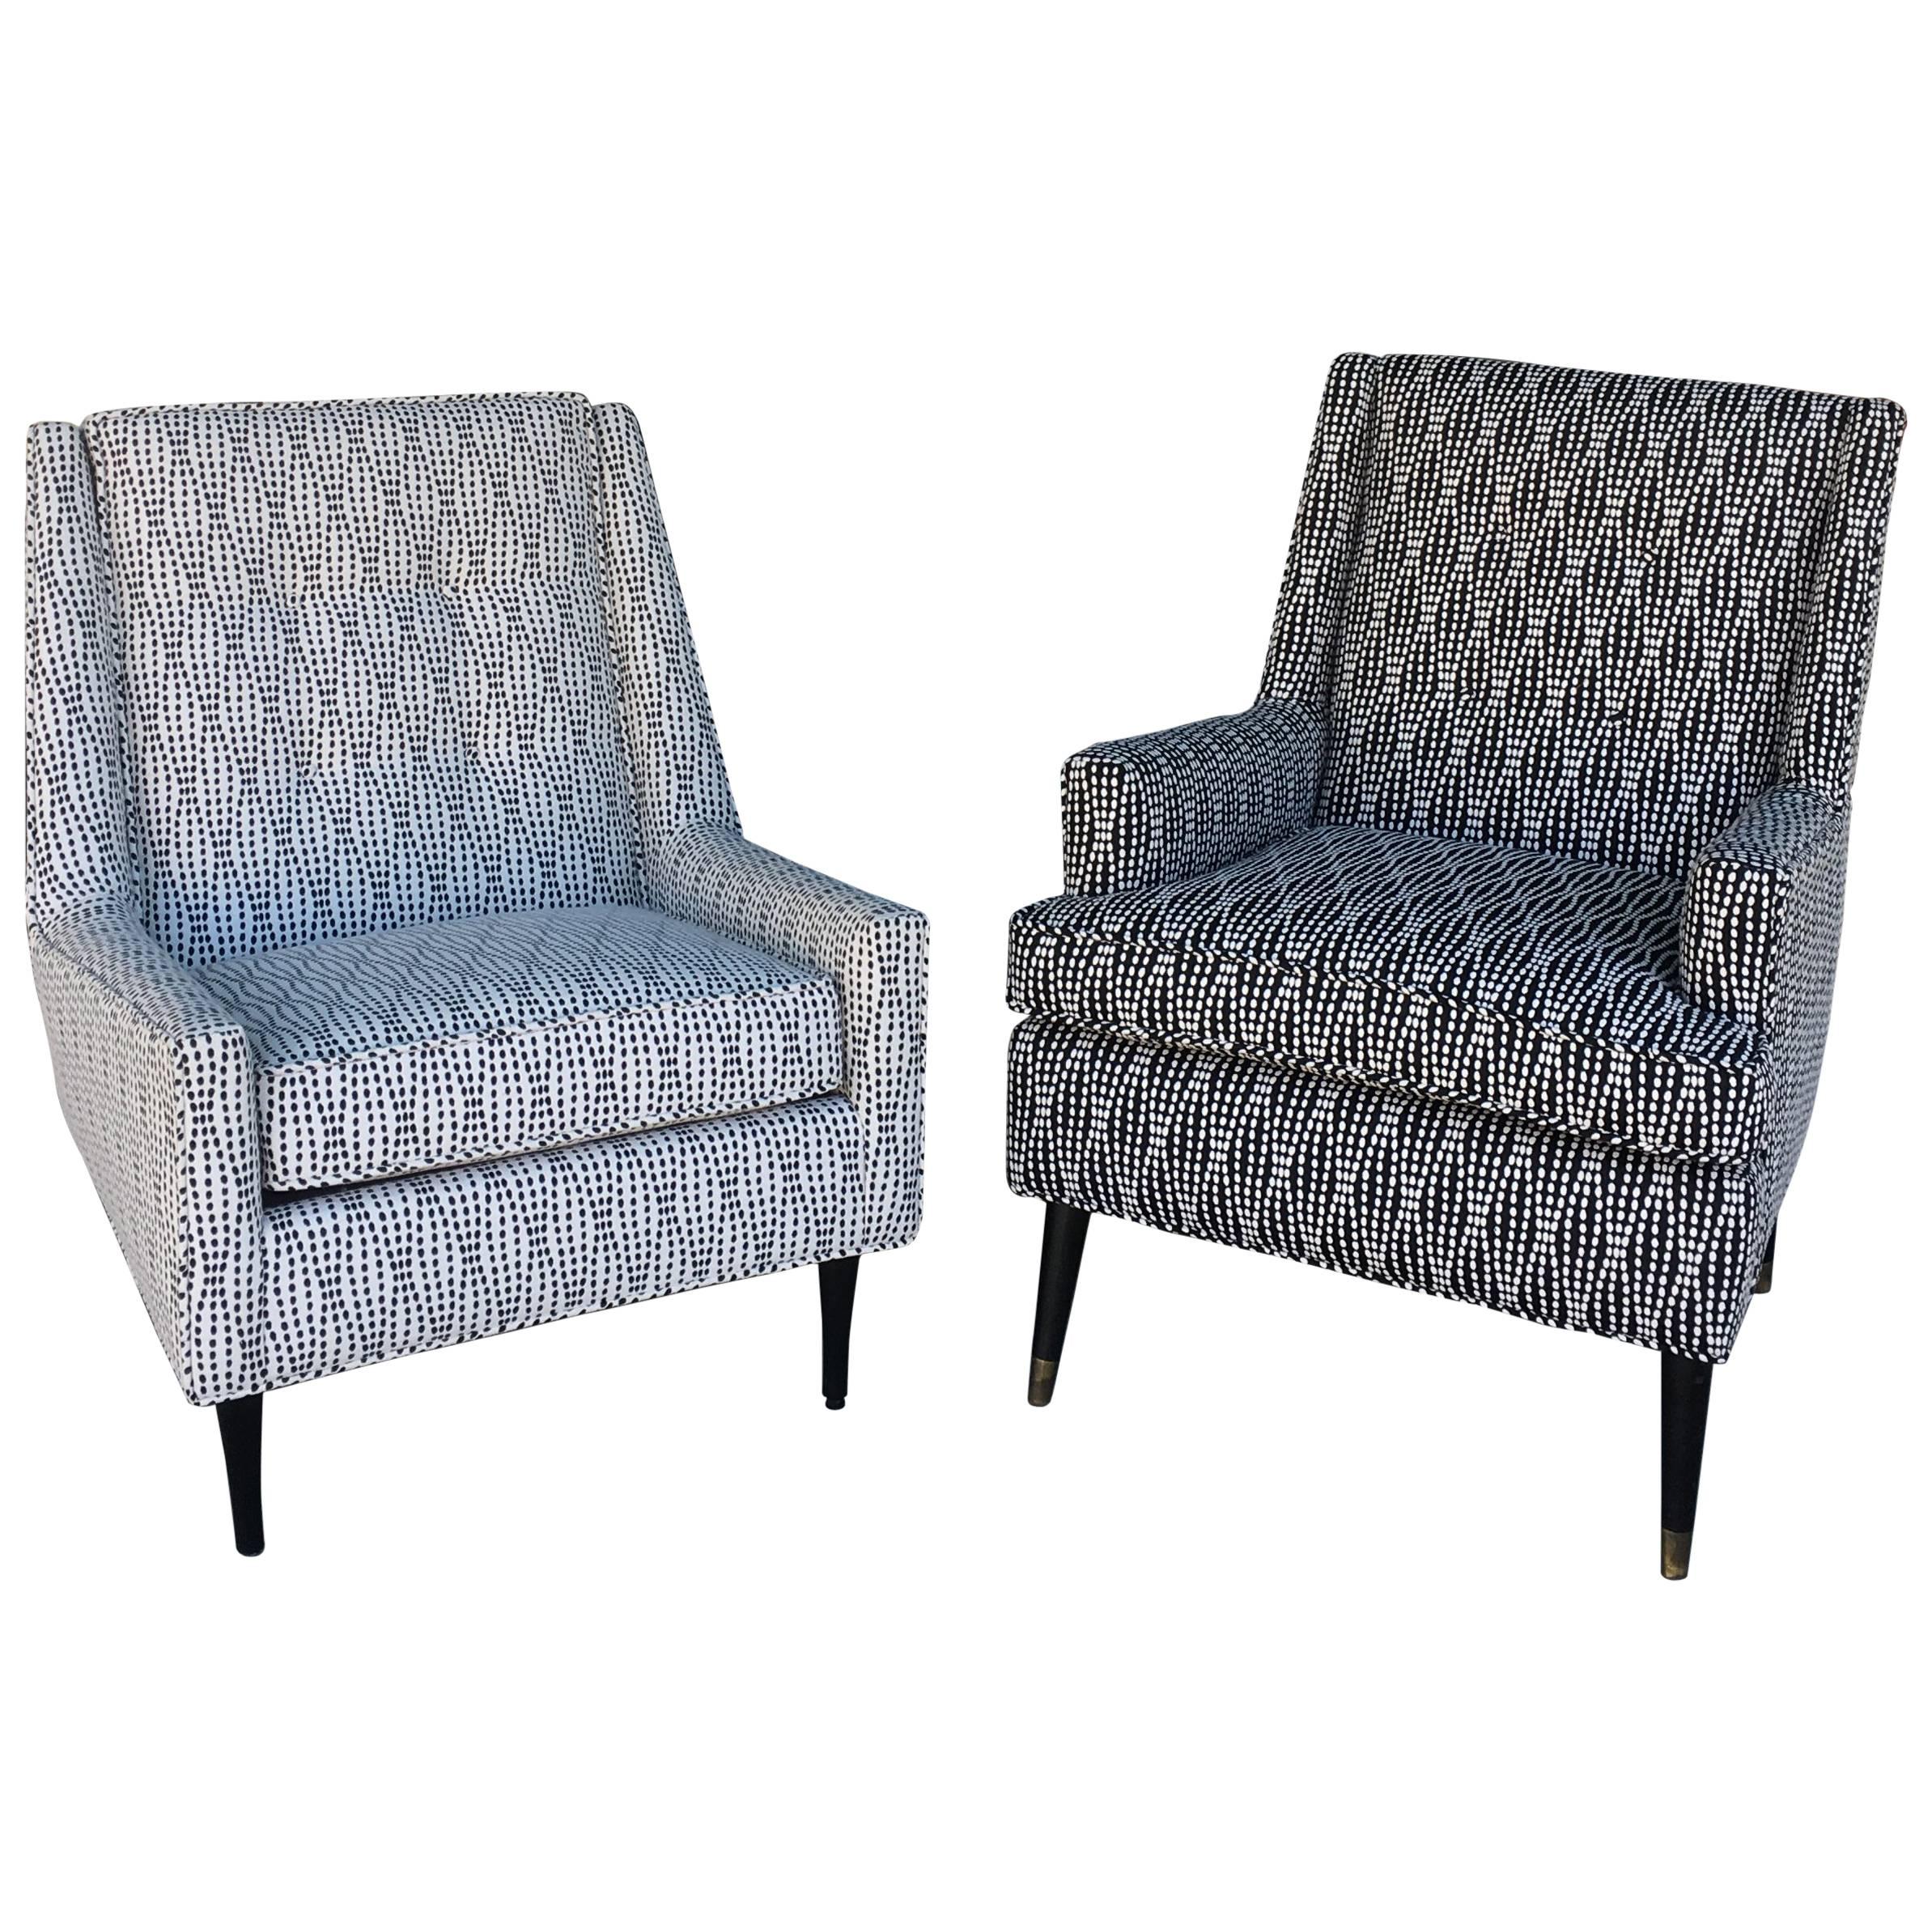 Pair Mid-Century Modern His and Hers Easy Chairs in New Black and White Jacquard